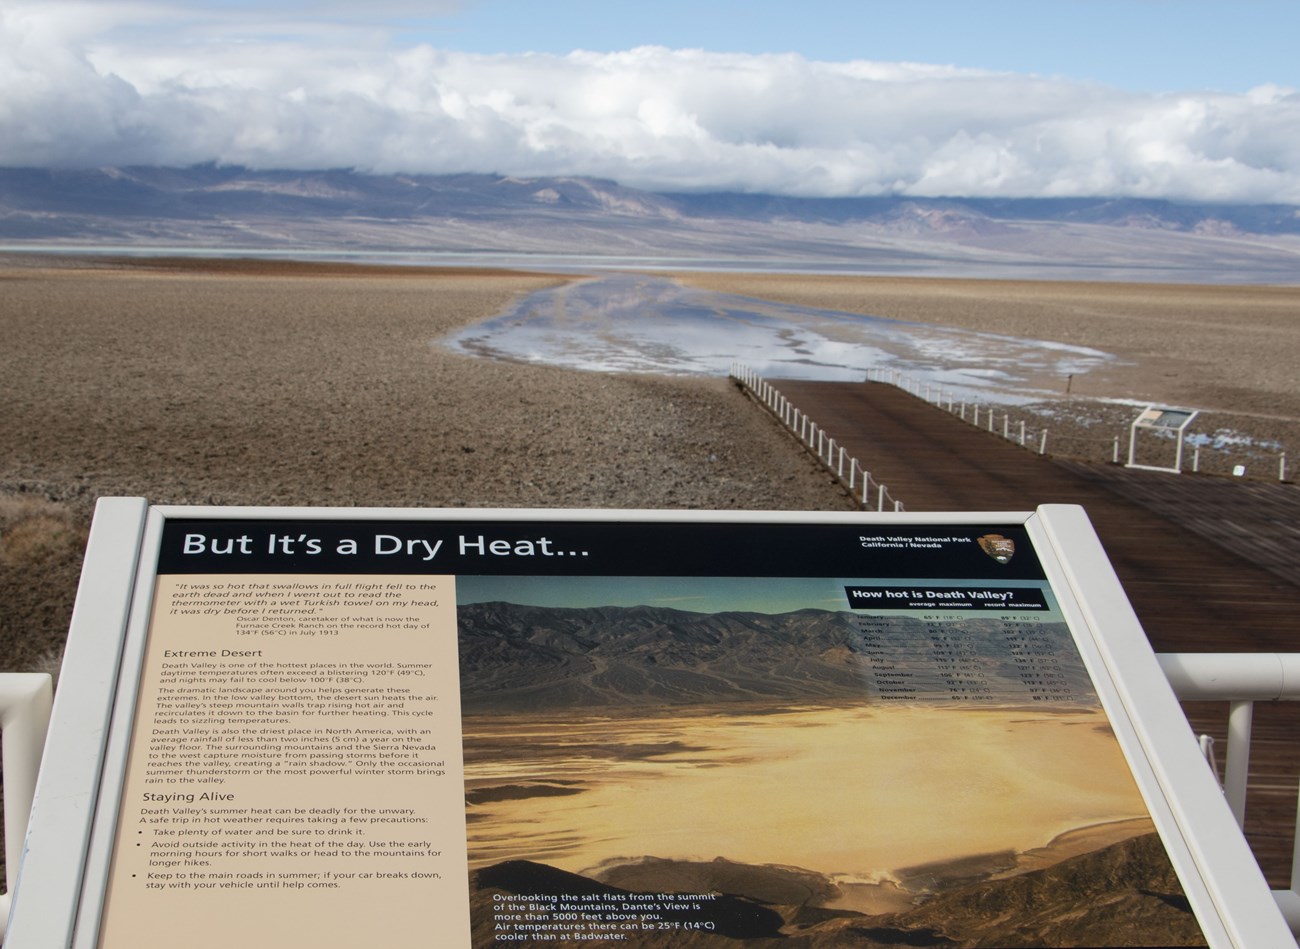 A sign in the foreground reads "But it's a Dry Heat . . .". The background is a brown boardwalk extending through a mud flat to a long narrow puddle with a much large body of water in the distance.